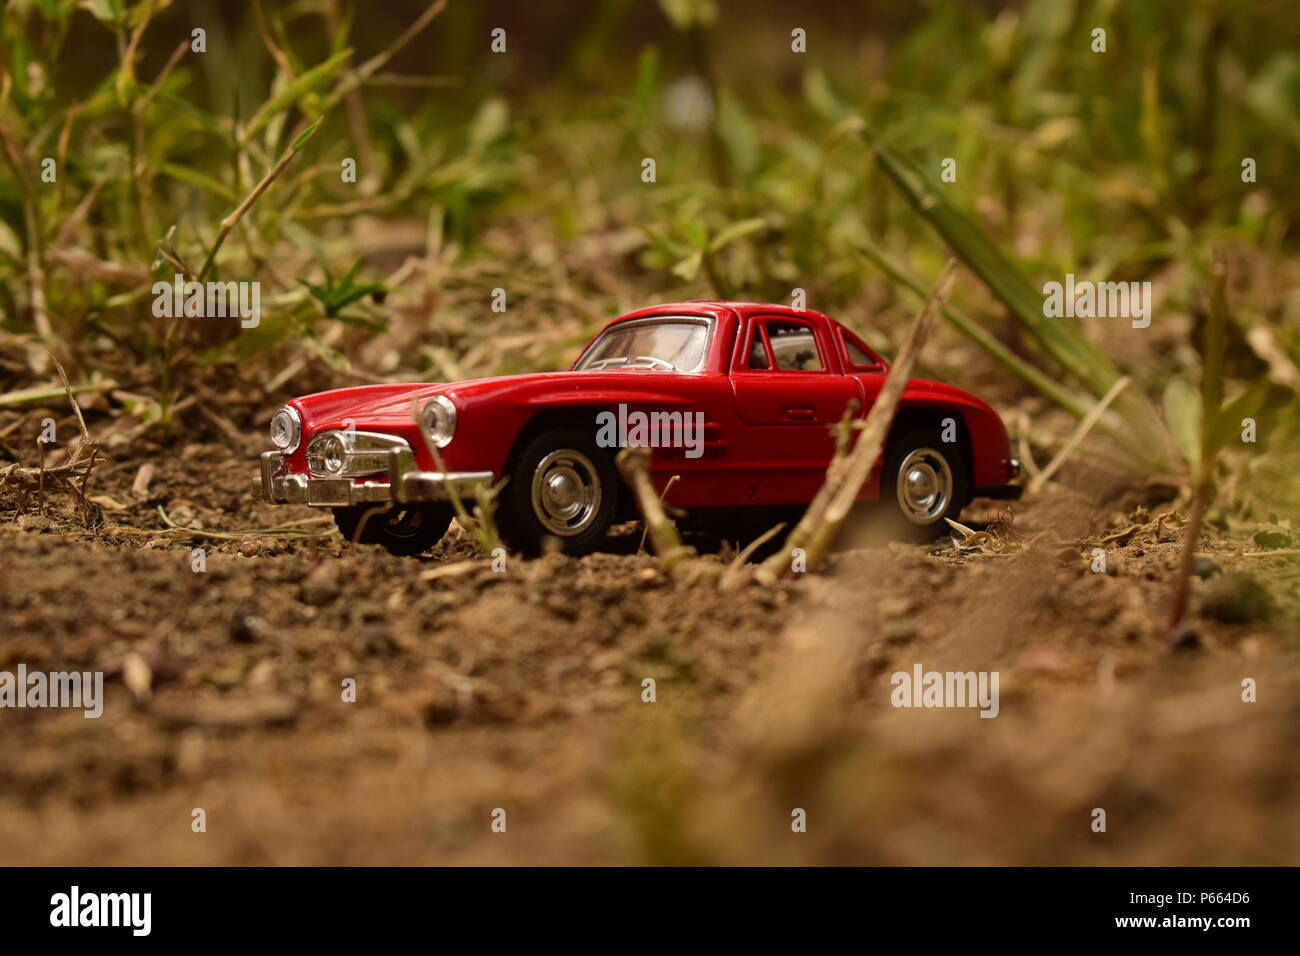 Retro Style Car Image With Beautiful look suitable for using anywhere; Kids wallpaper wall photographs Stock Photo